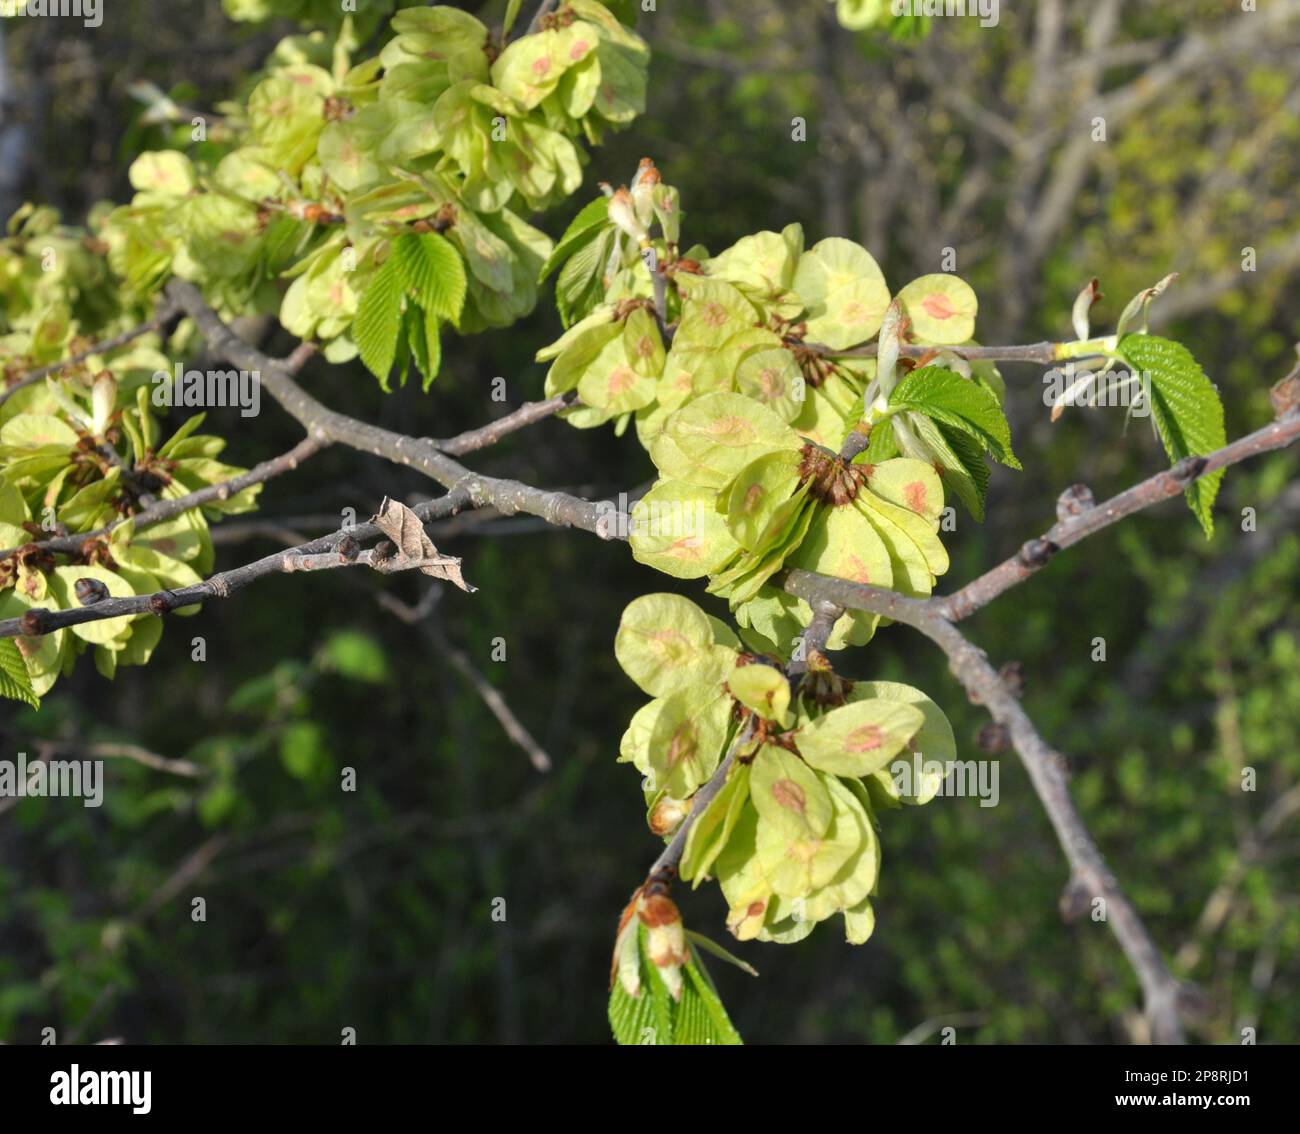 In spring, an elm grows and blooms in nature Stock Photo